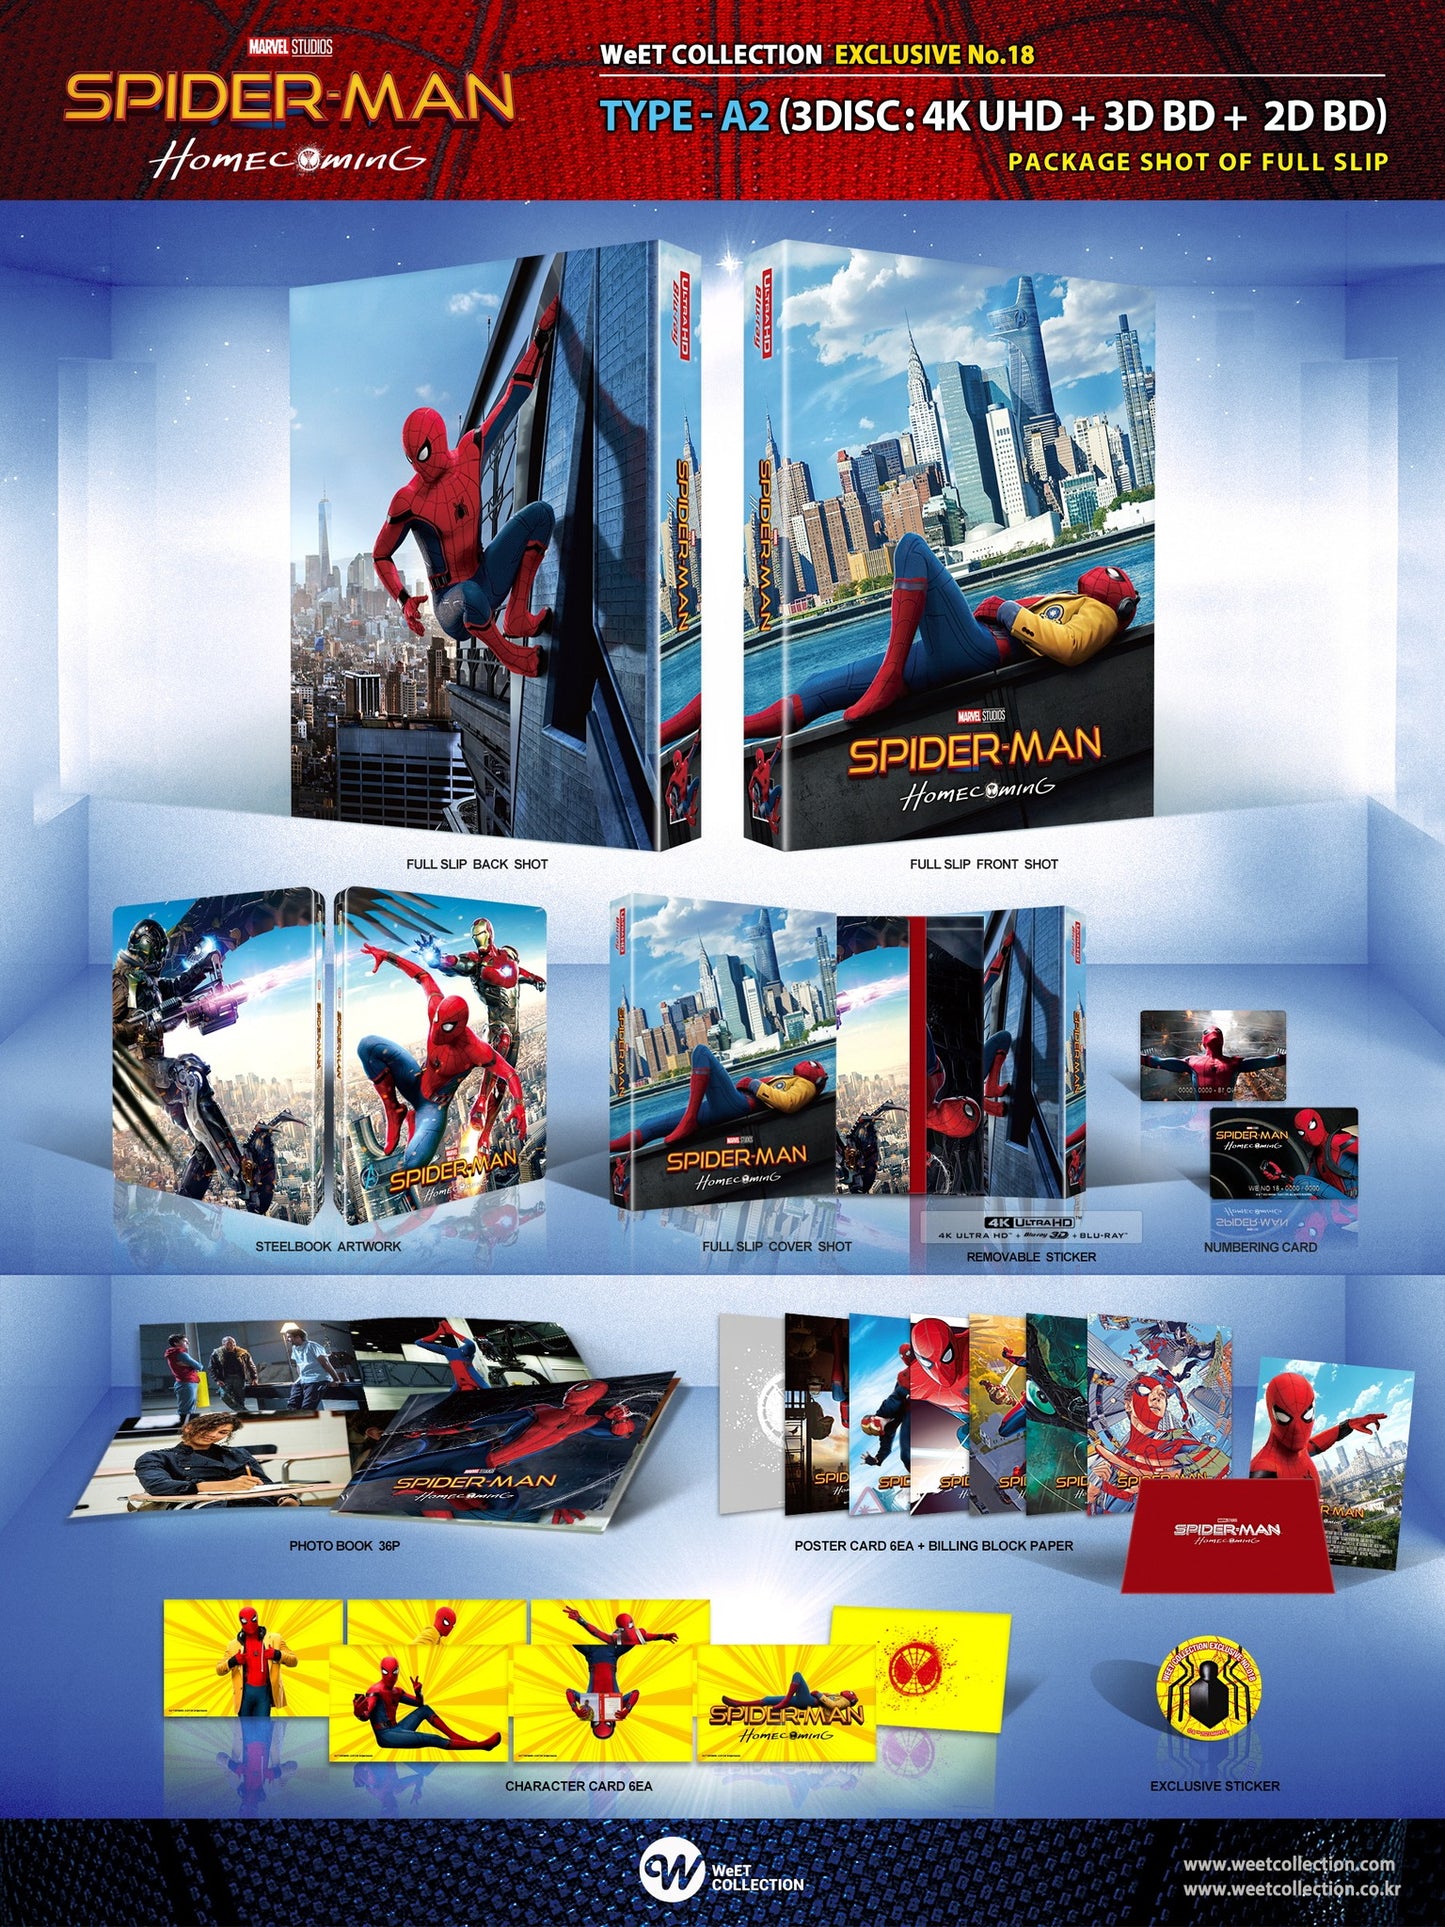 Spider-Man Homecoming 4K 3D Blu-ray Steelbook WeET Collection Exclusive #18 HDN GB Pre-Order One Click Box Set